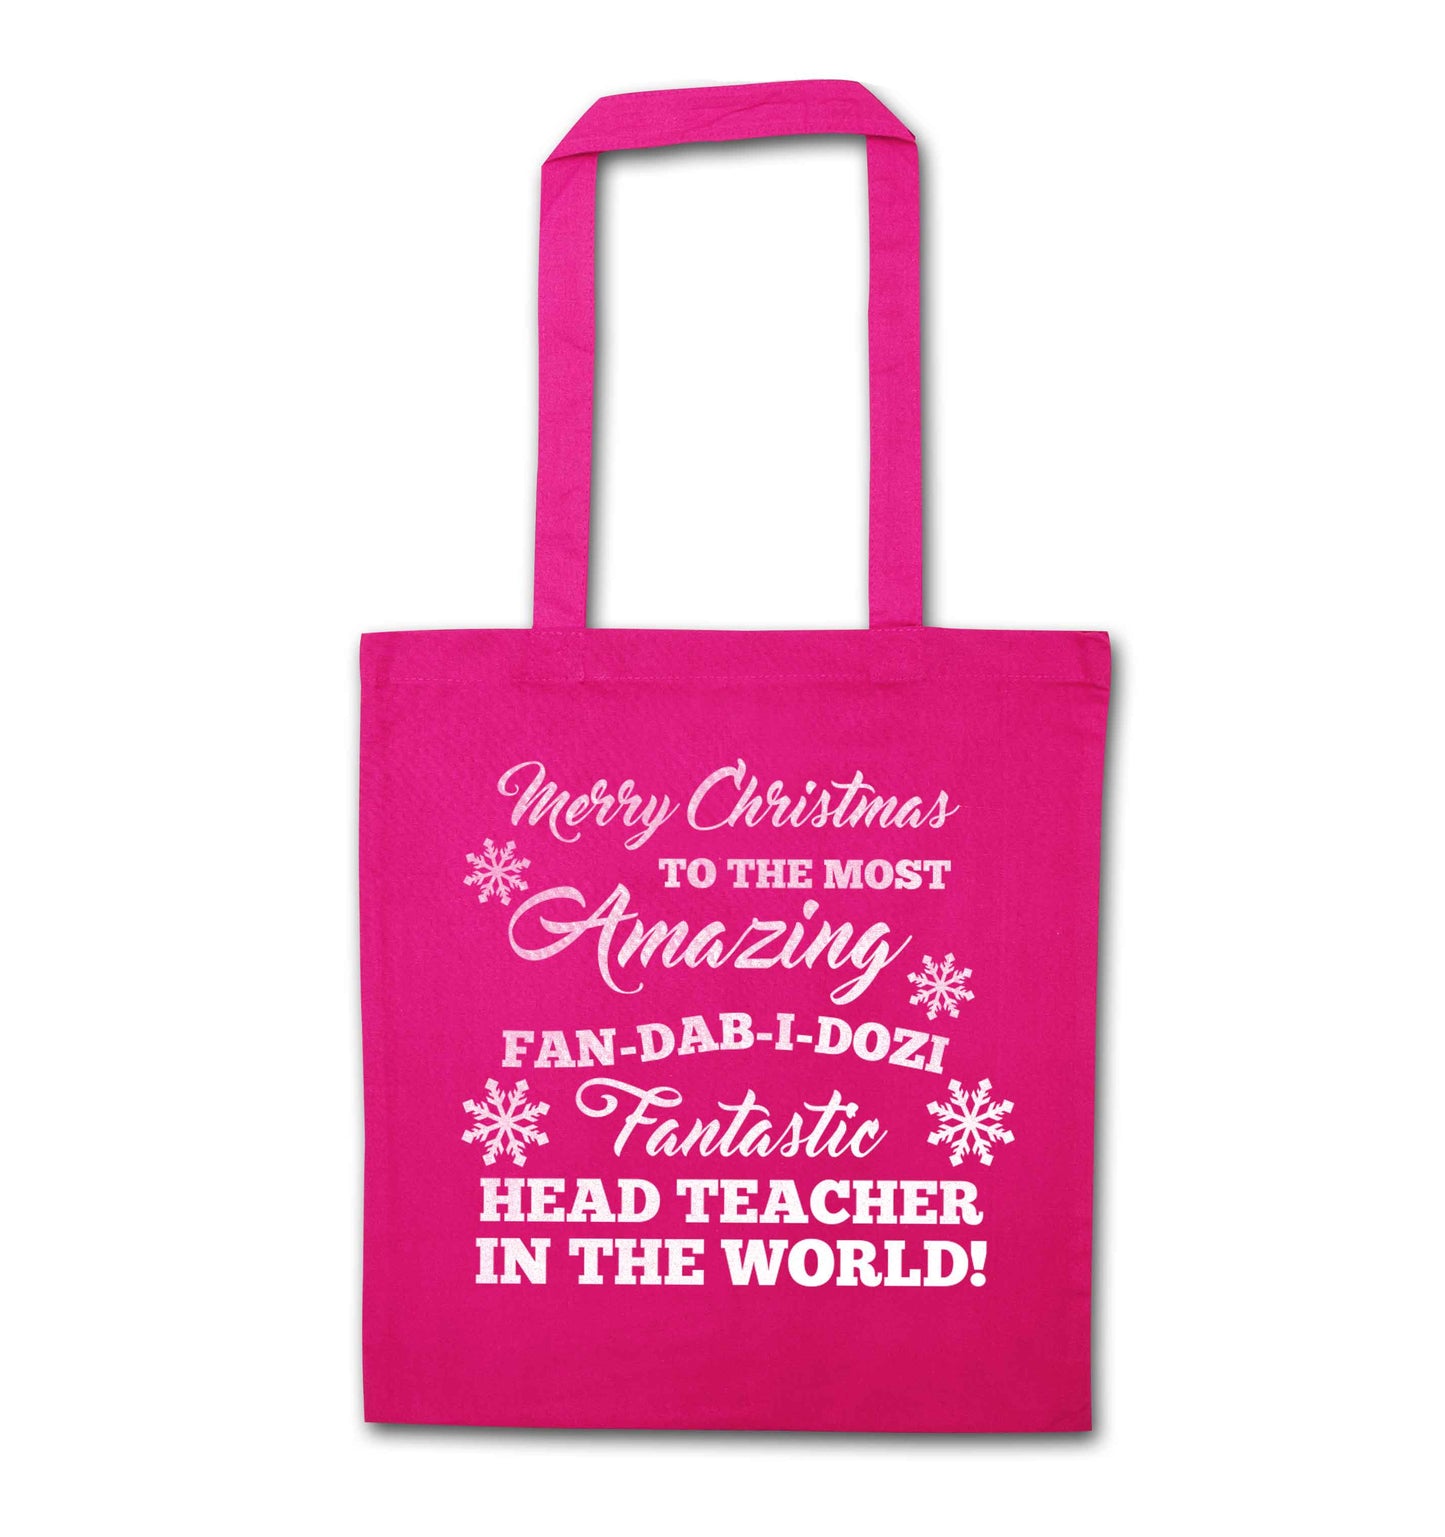 Merry Christmas to the most amazing fan-dab-i-dozi fantasic head teacher in the world pink tote bag